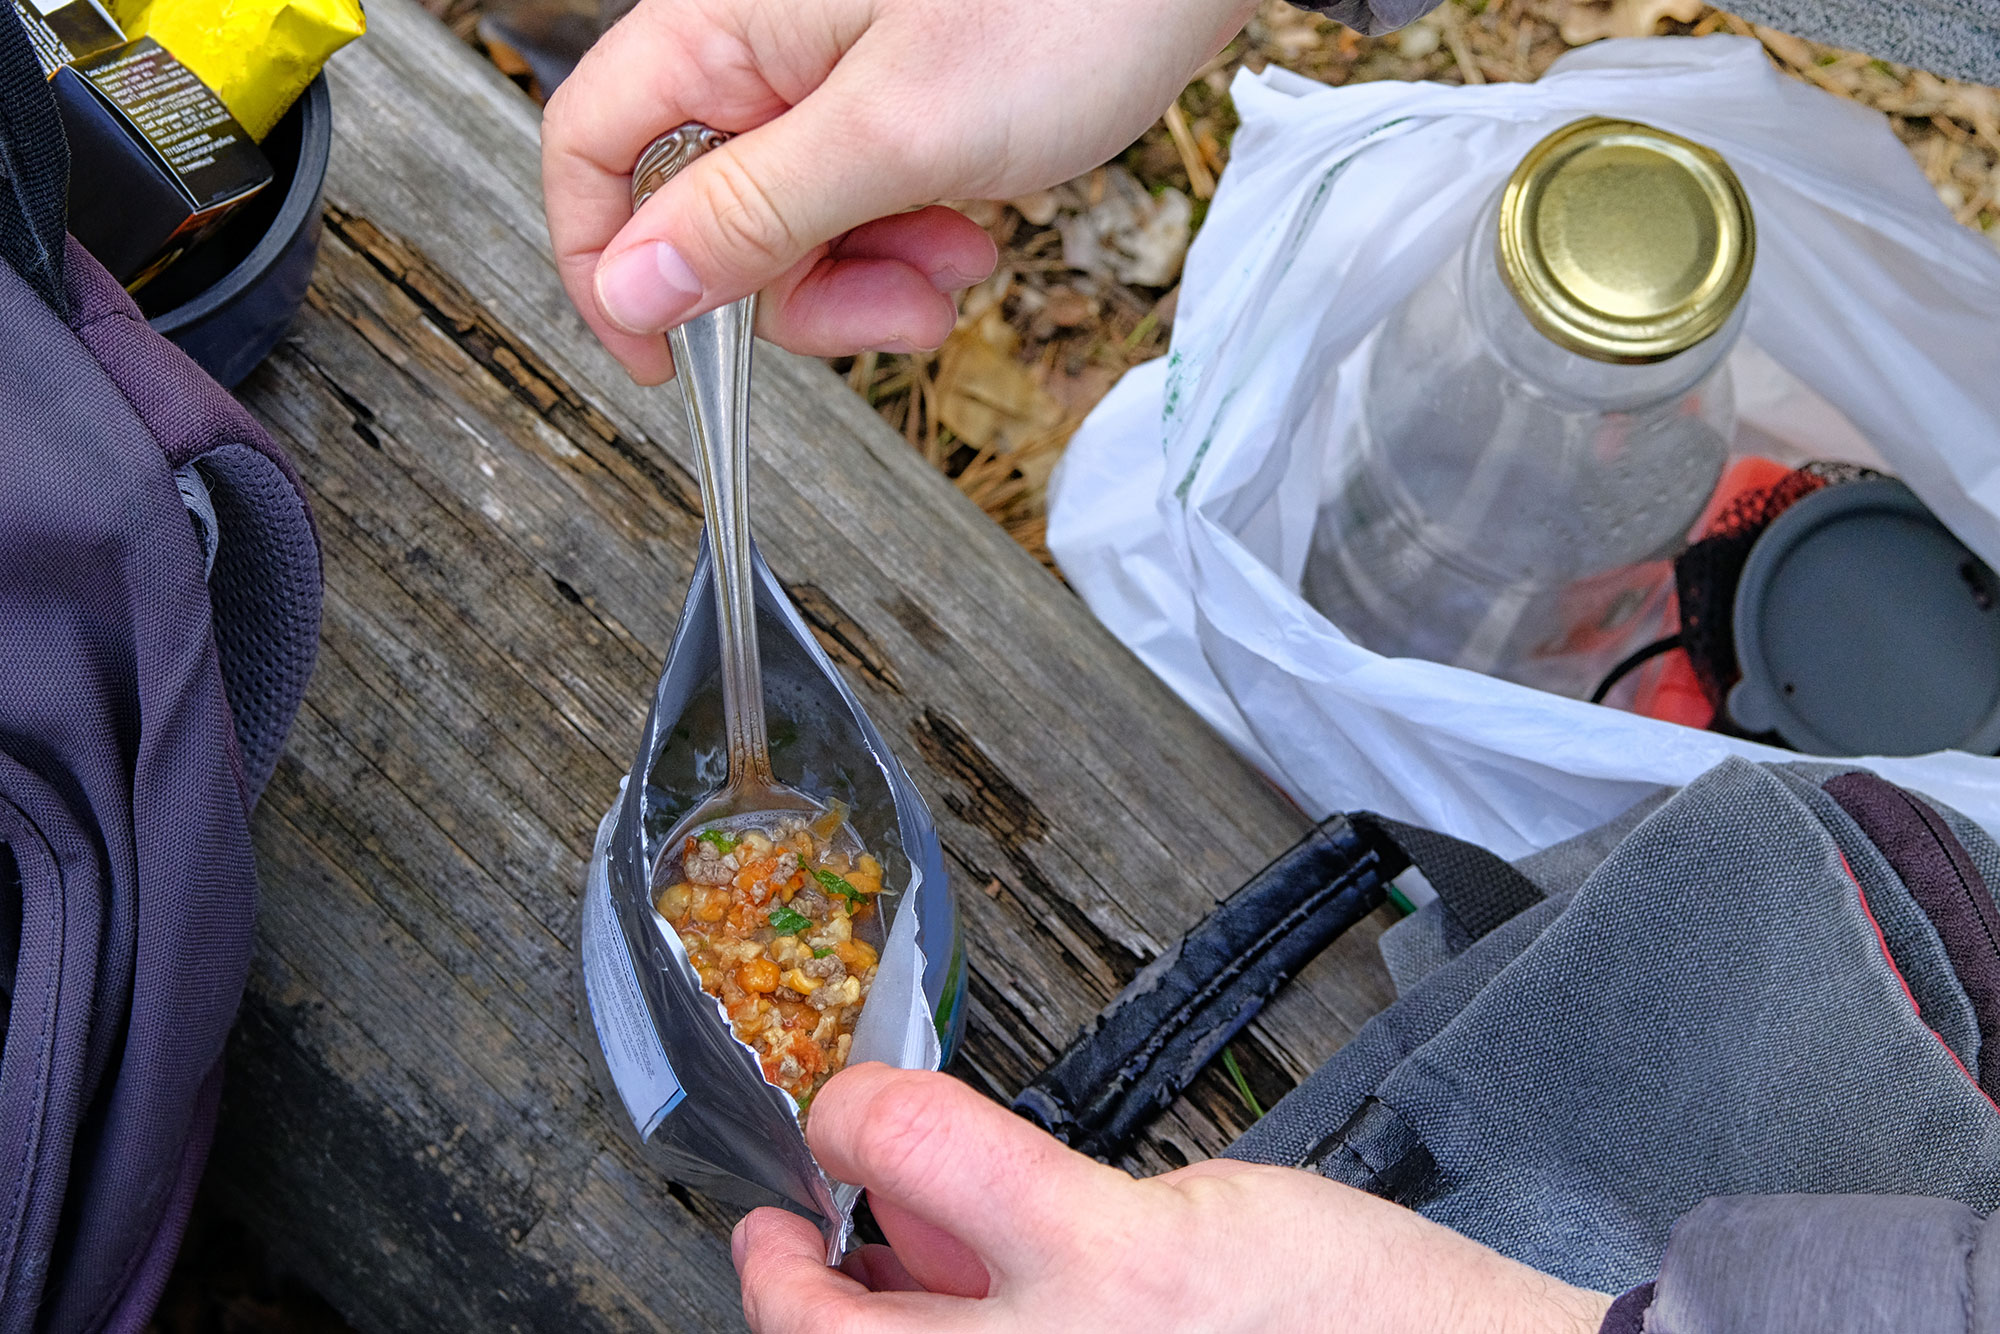 Trail Chili, Dehydrated Camping Meals